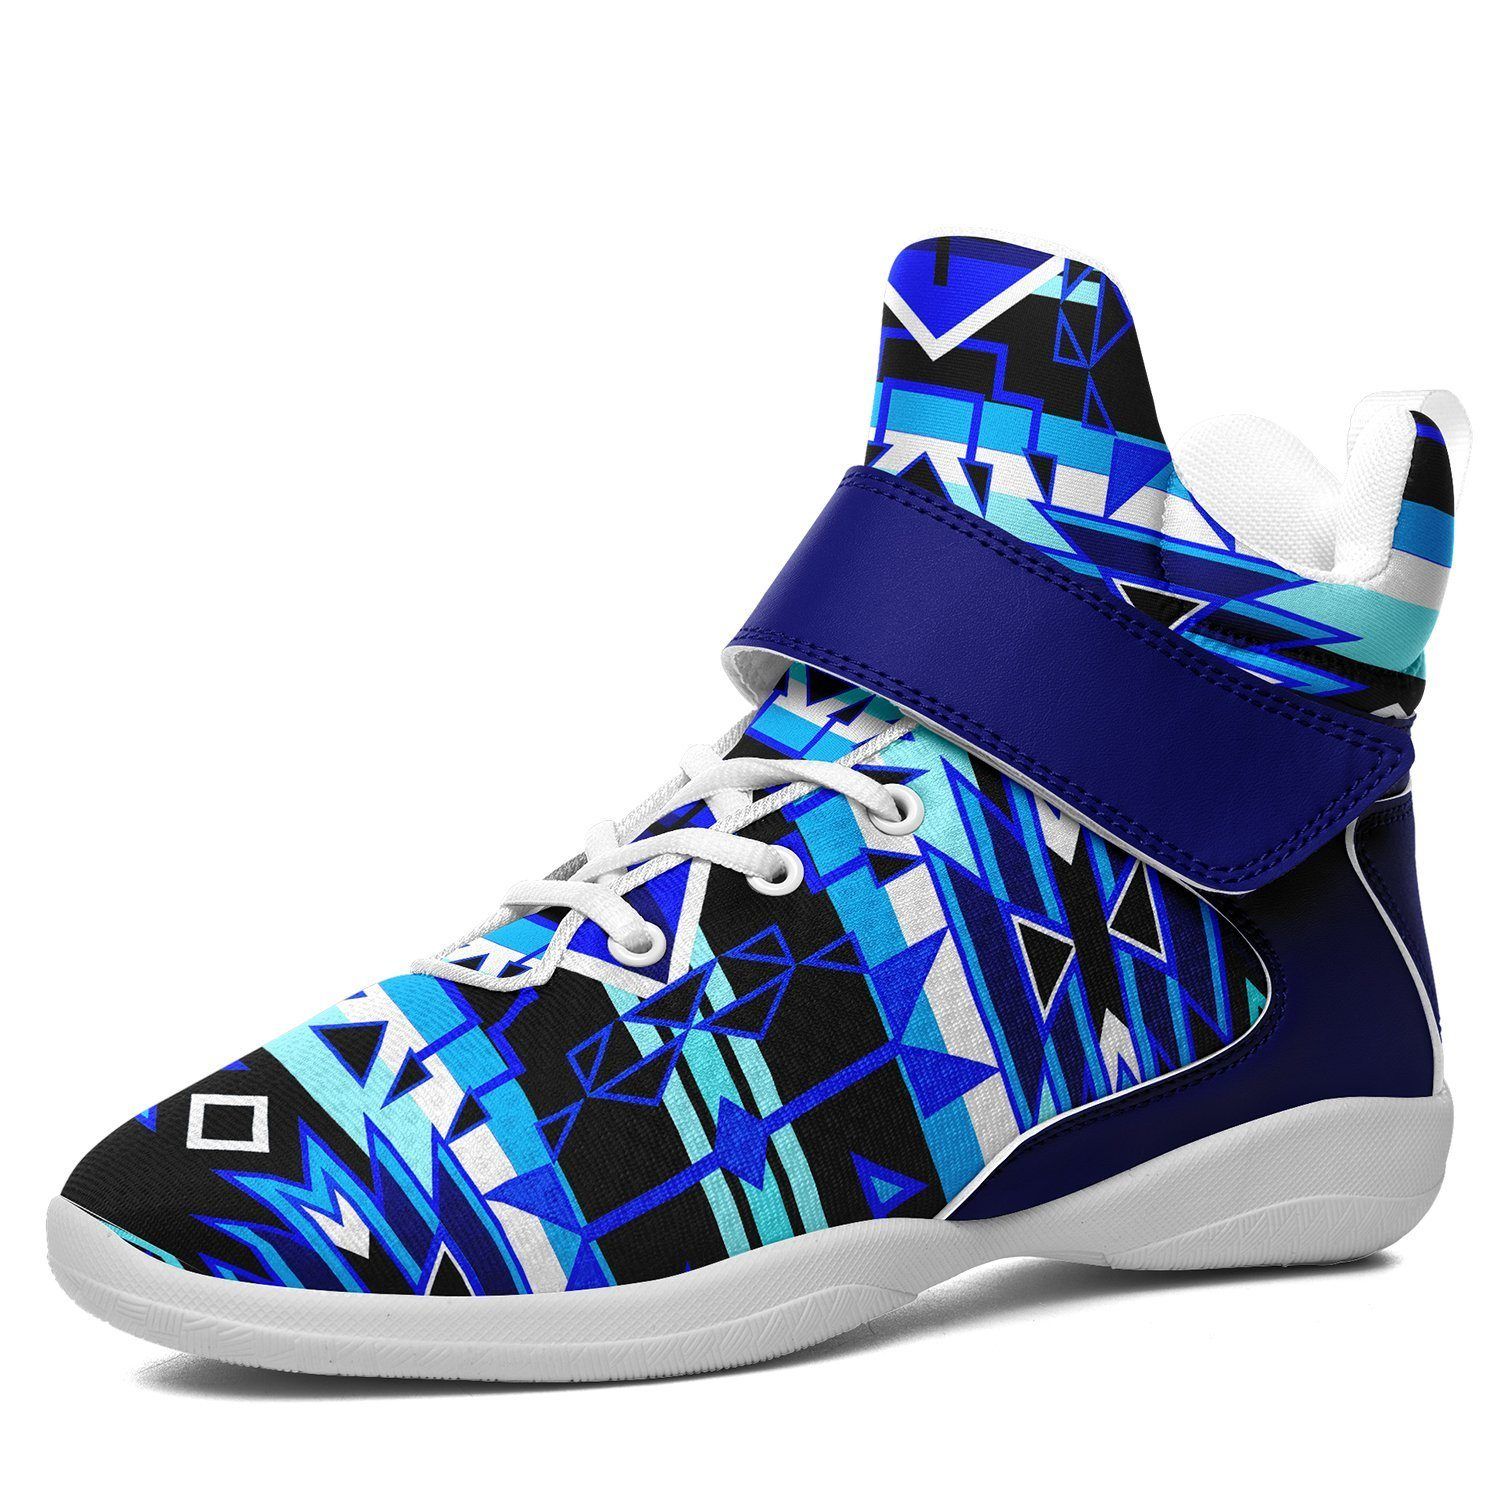 Force of Nature Winter Night Ipottaa Basketball / Sport High Top Shoes - White Sole 49 Dzine US Men 7 / EUR 40 White Sole with Blue Strap 